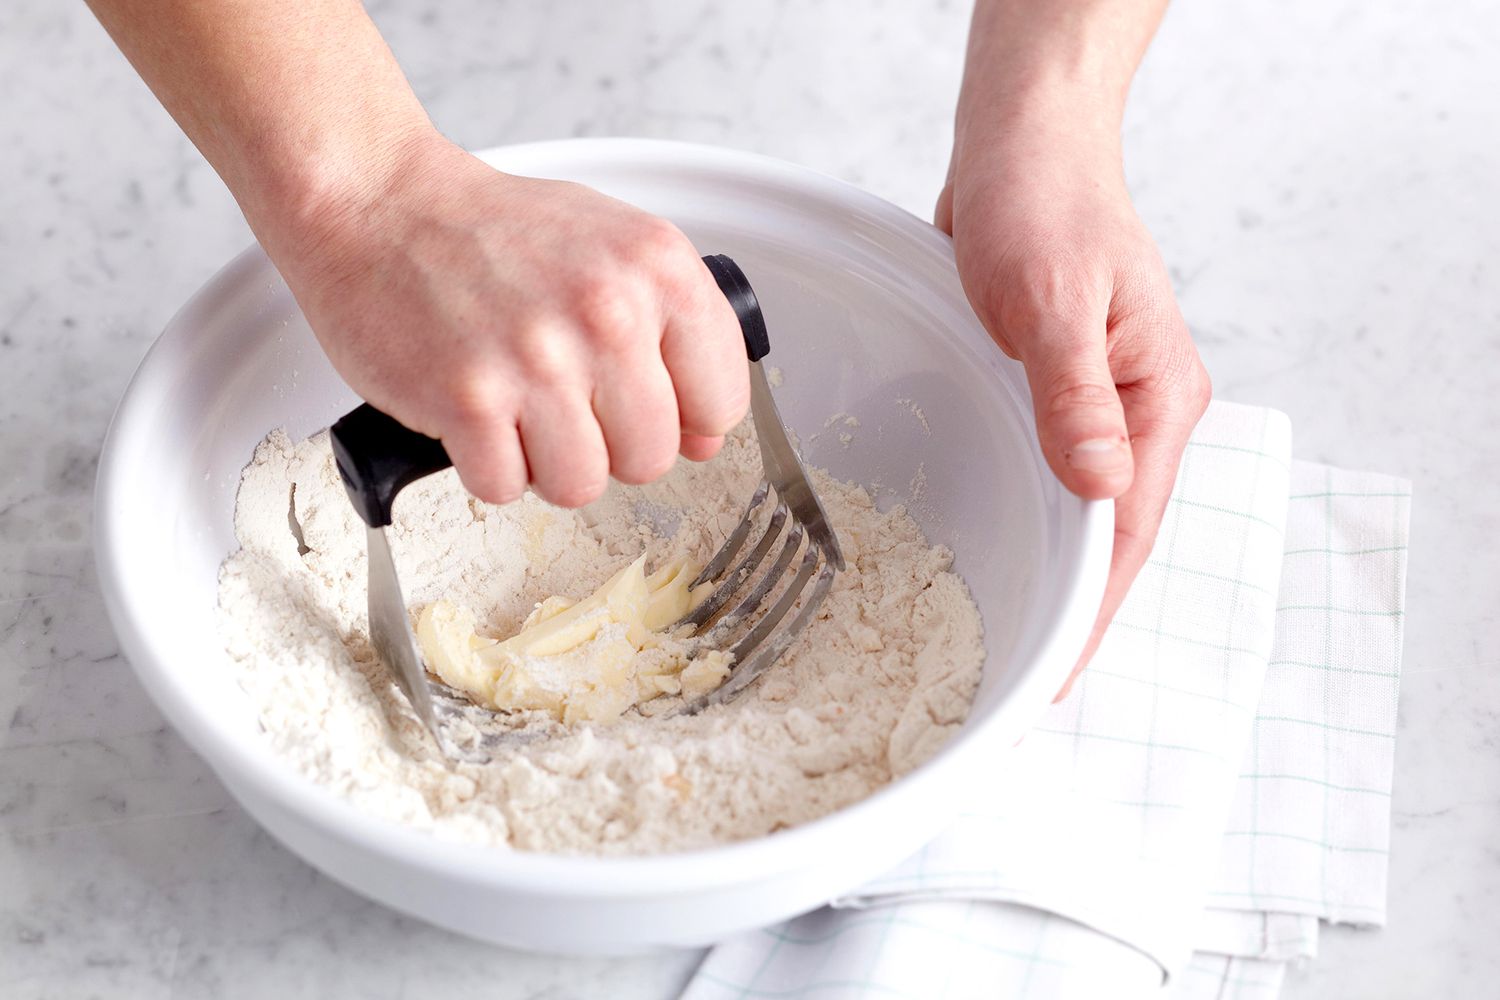 Using tool to cut butter into flour